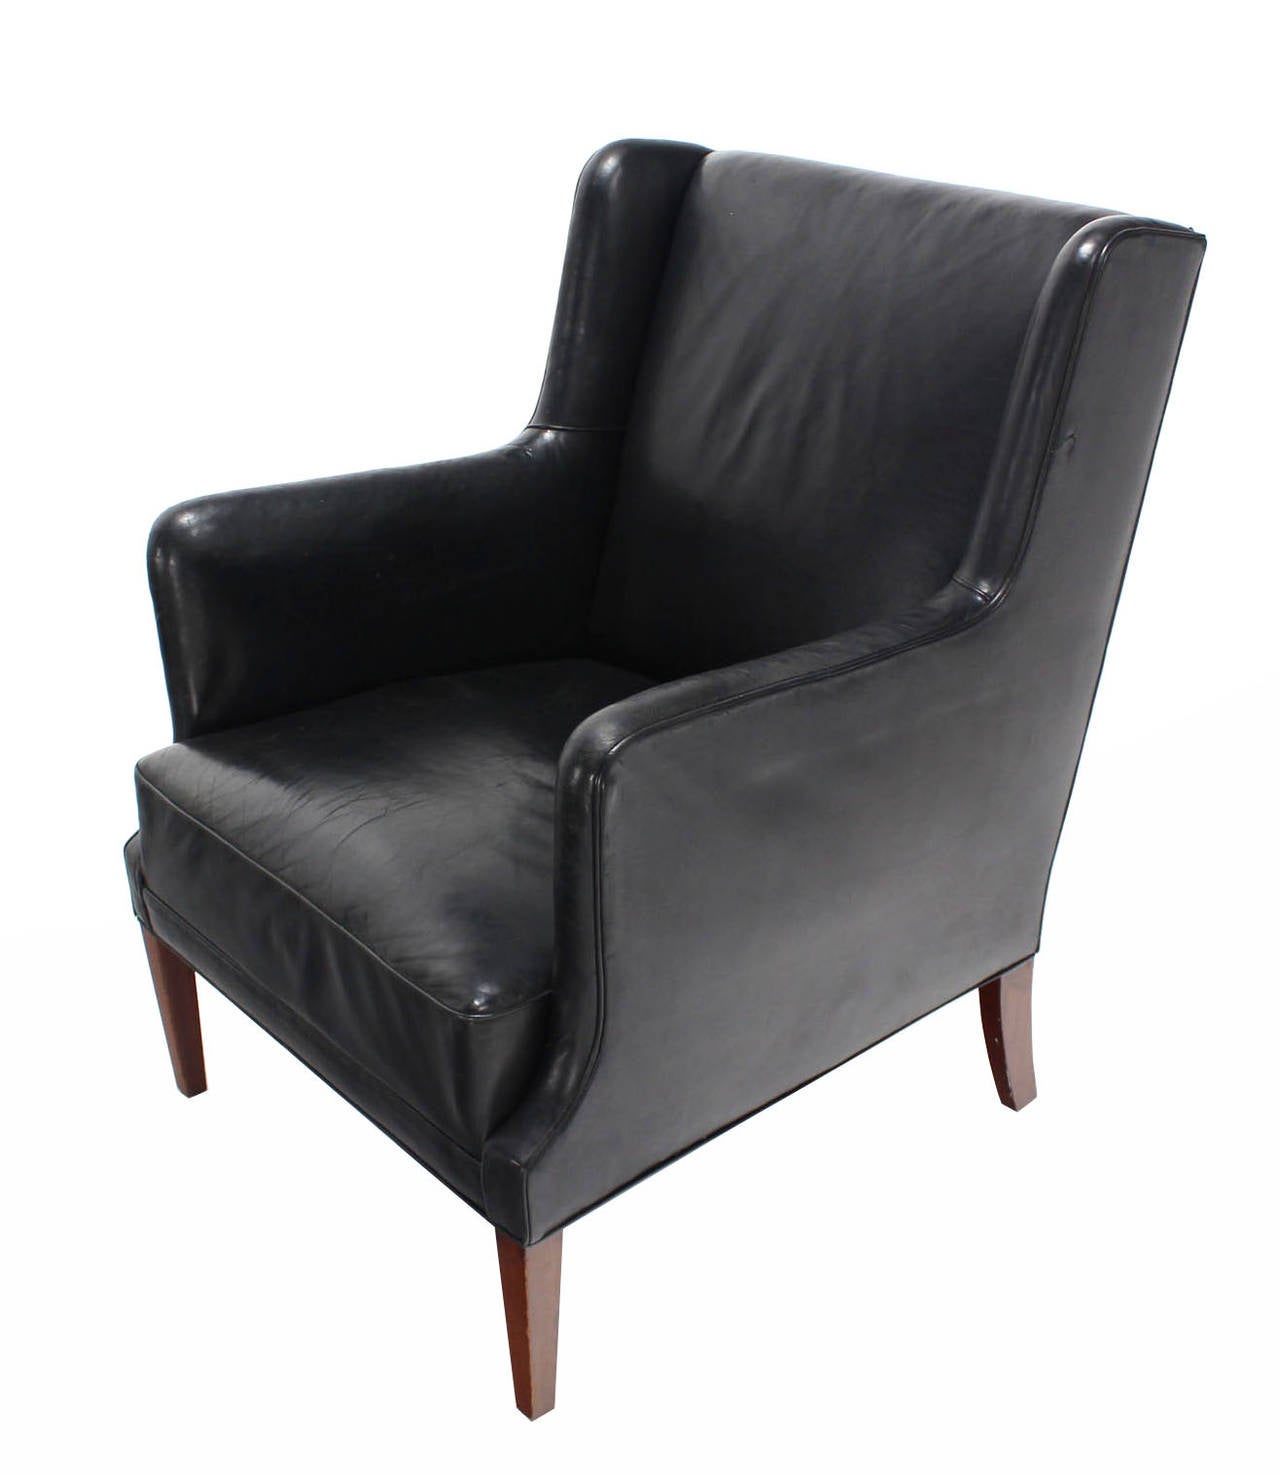 Pair of Black Upholstered Leather Chairs 2